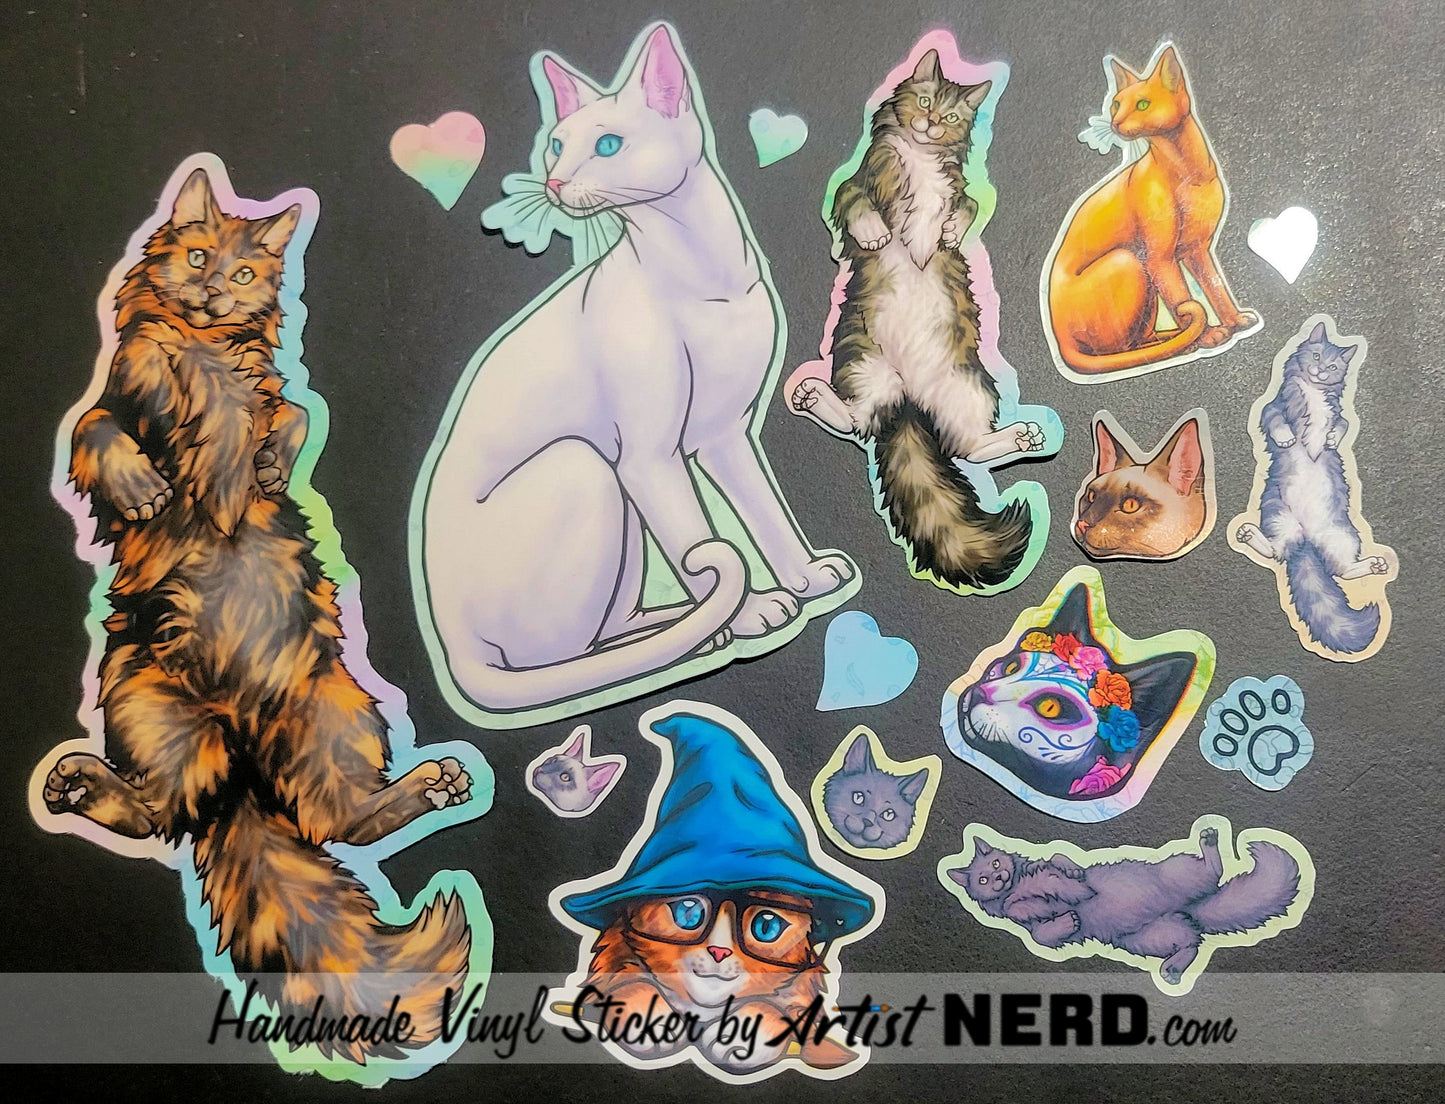 Random Themed Vinyl Sticker Grab - Cat, Dog or Sugar Skull - Non-Standard sized, Misprints, Discontinued, Imperfect, and other includes Sticker-fetti